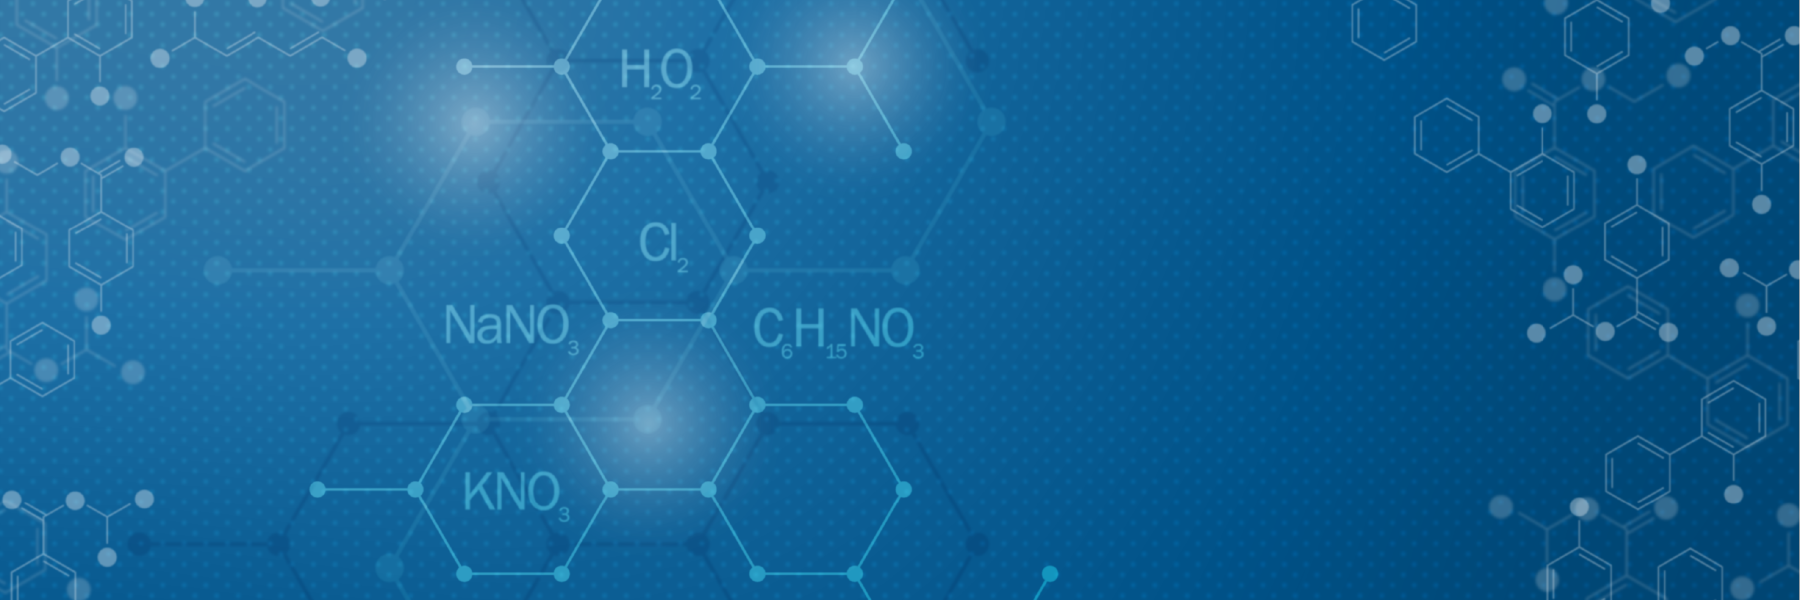 A background image featuring chemical icons